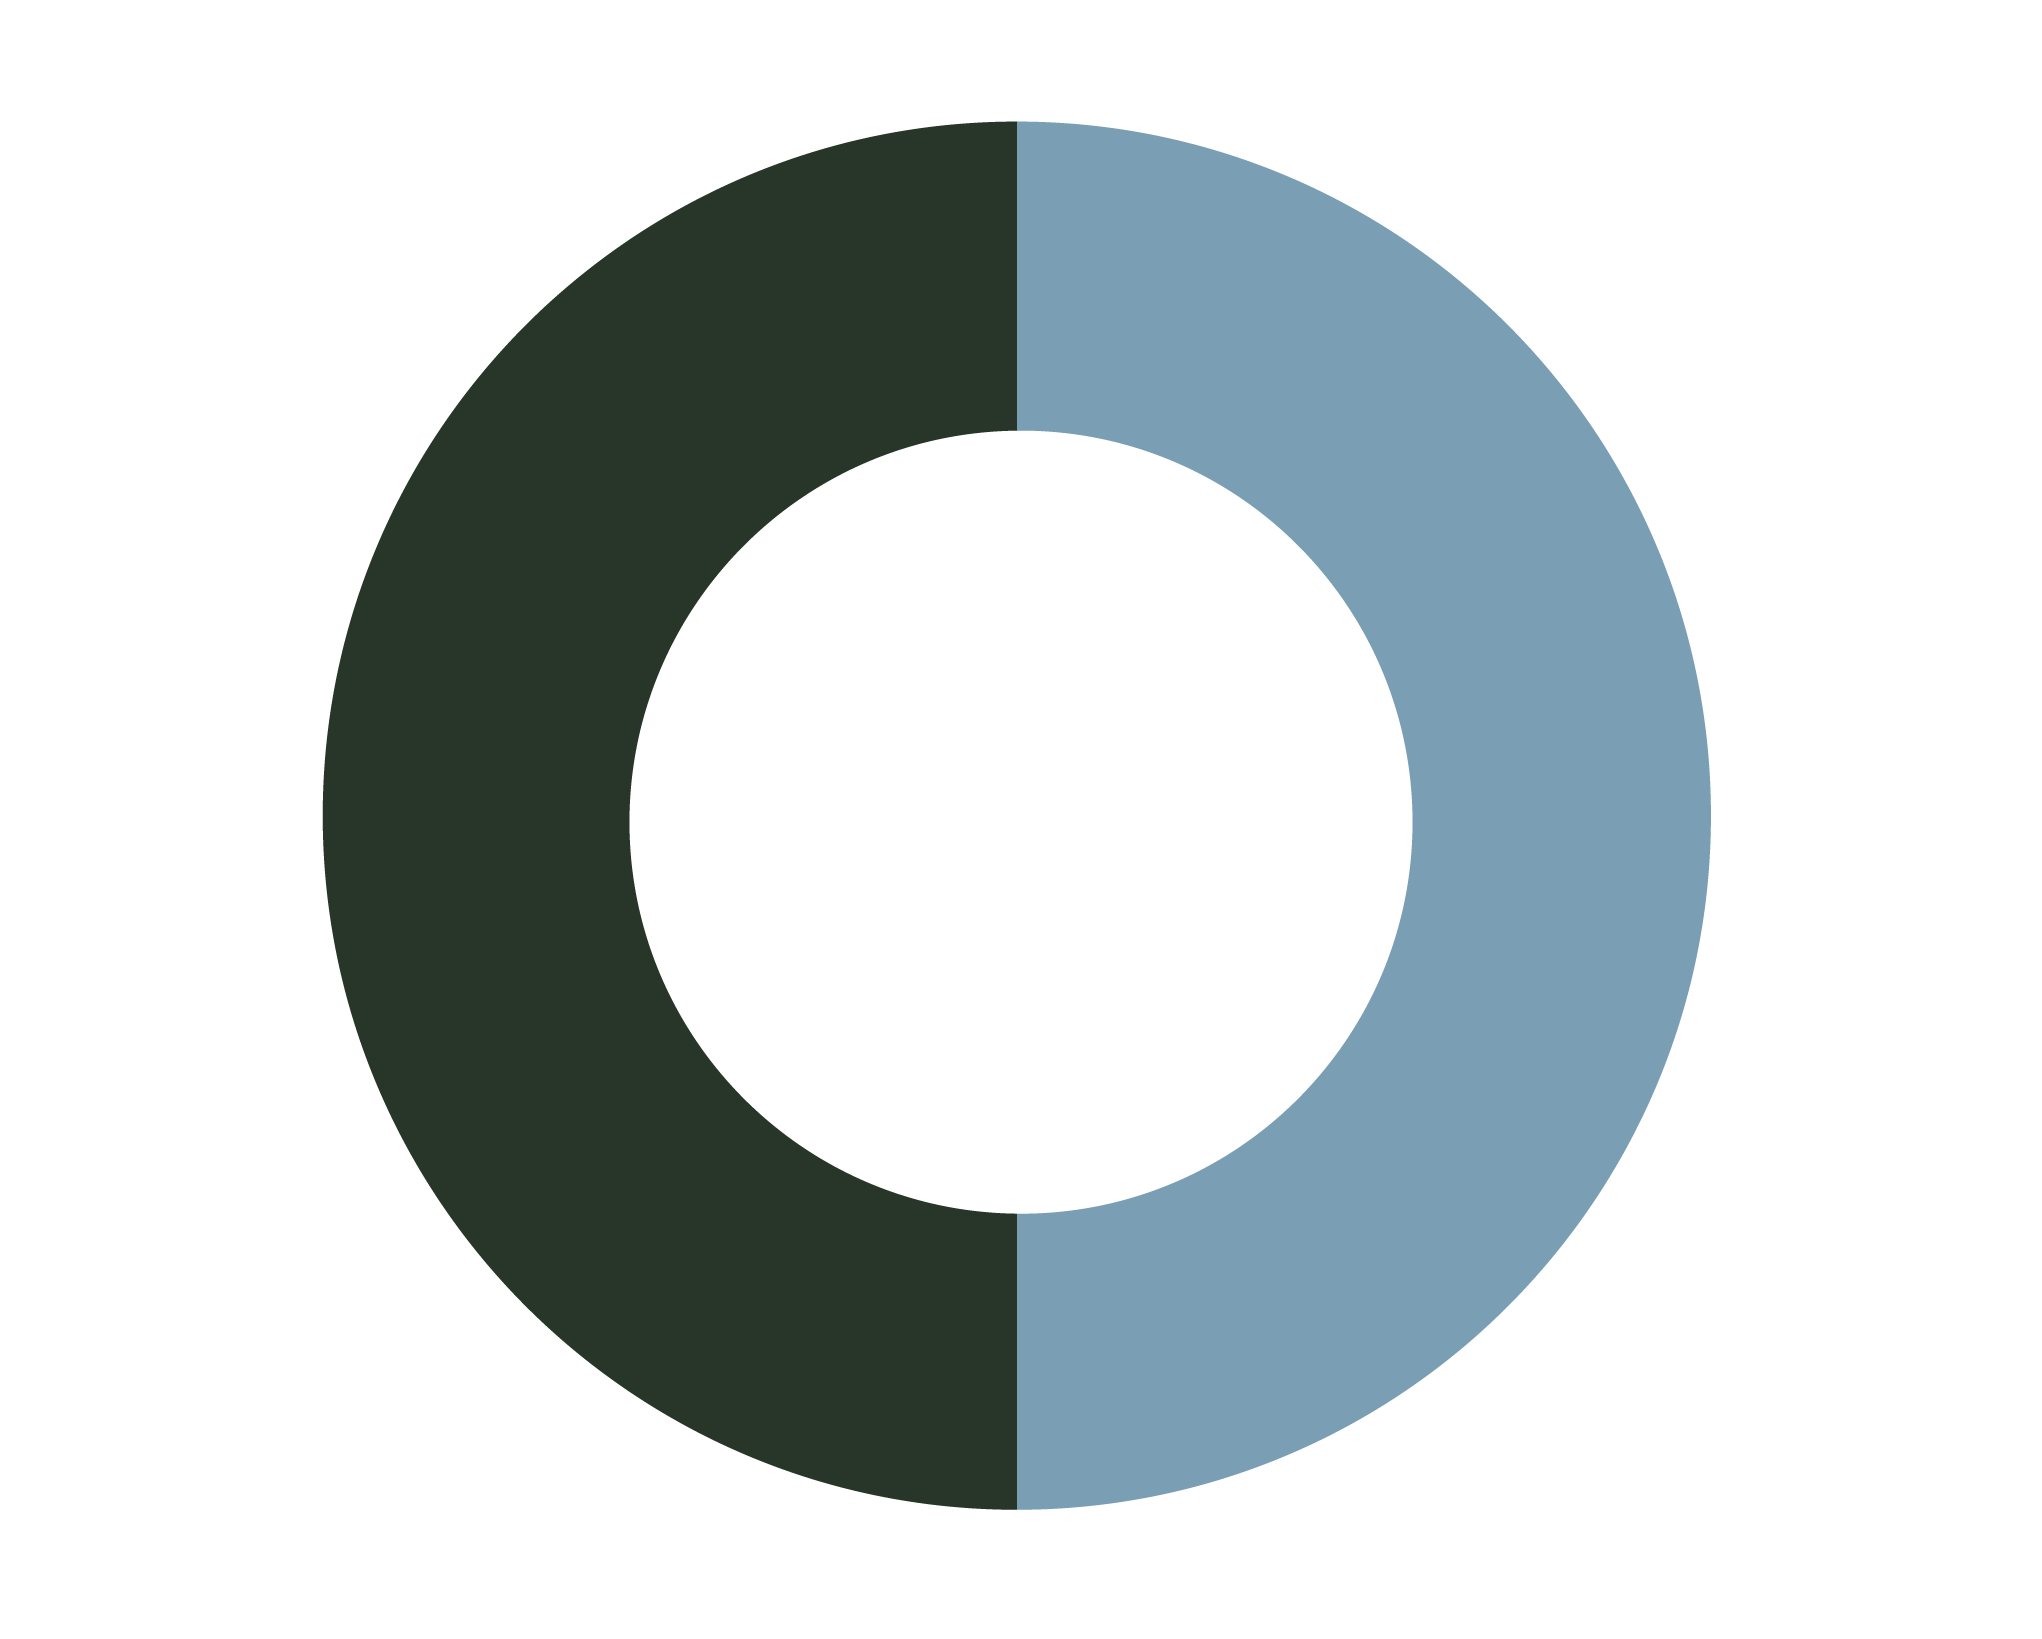 Foreign vs US Patents pie chart